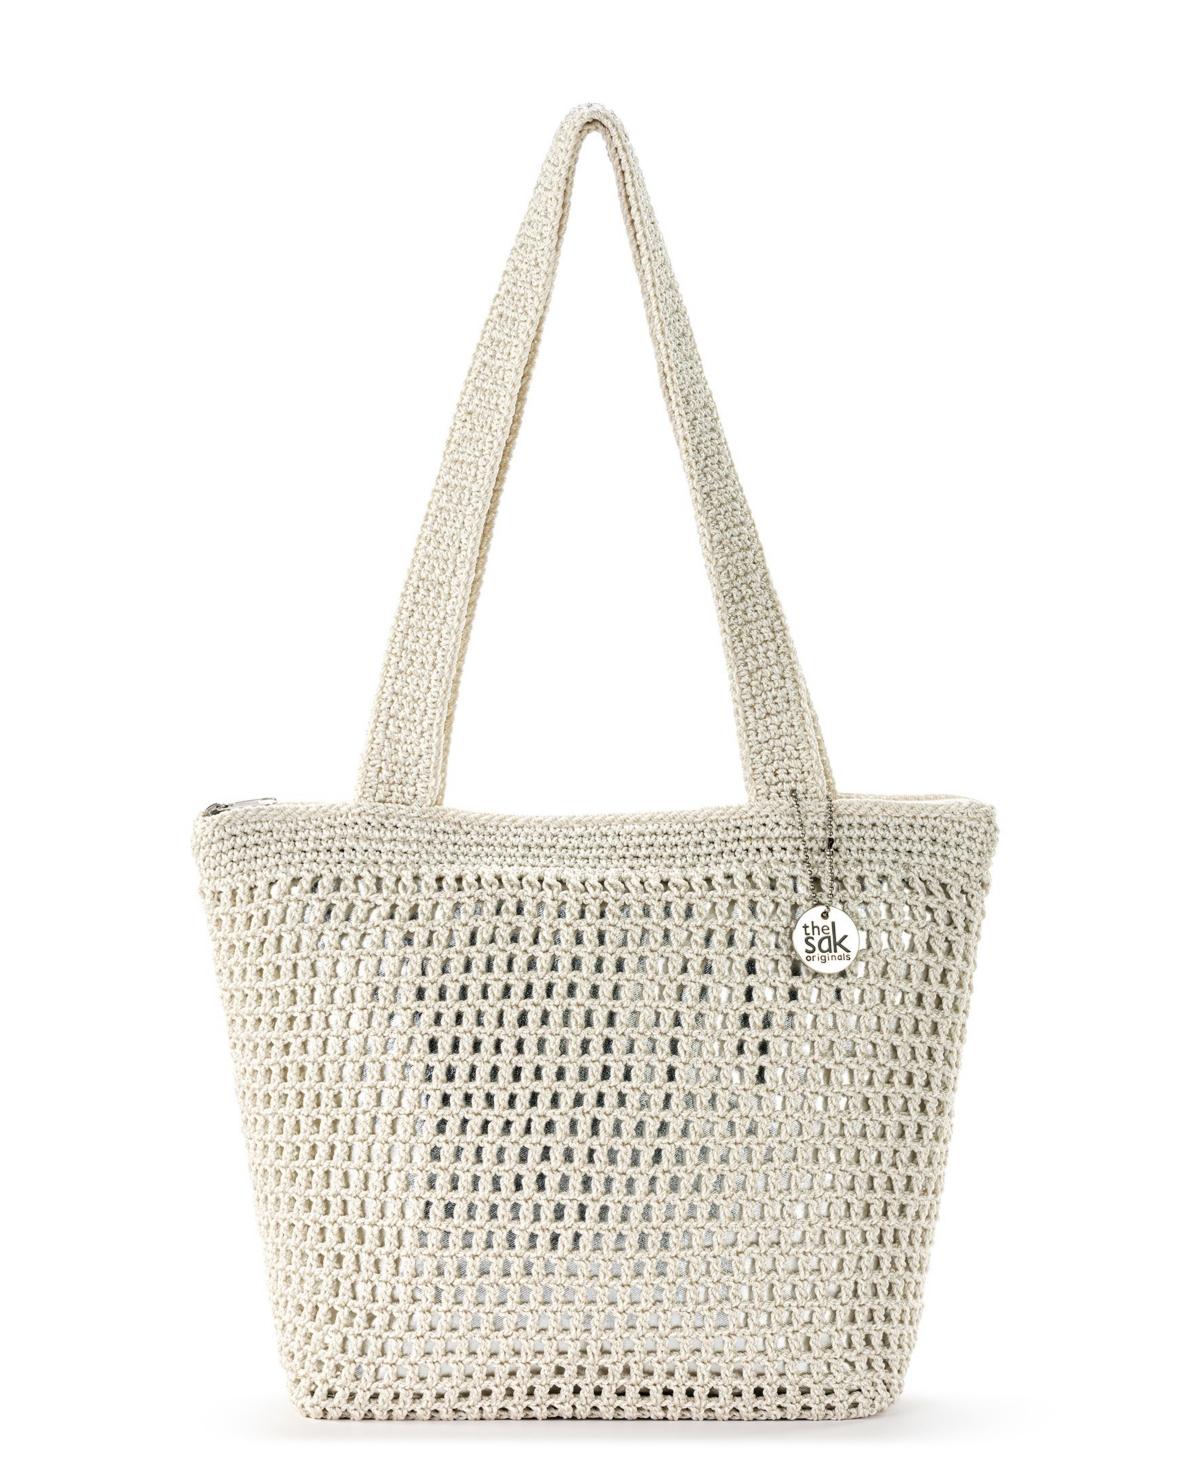 The Sak Women's Casual Classics Crochet Tote In Natural With Silver